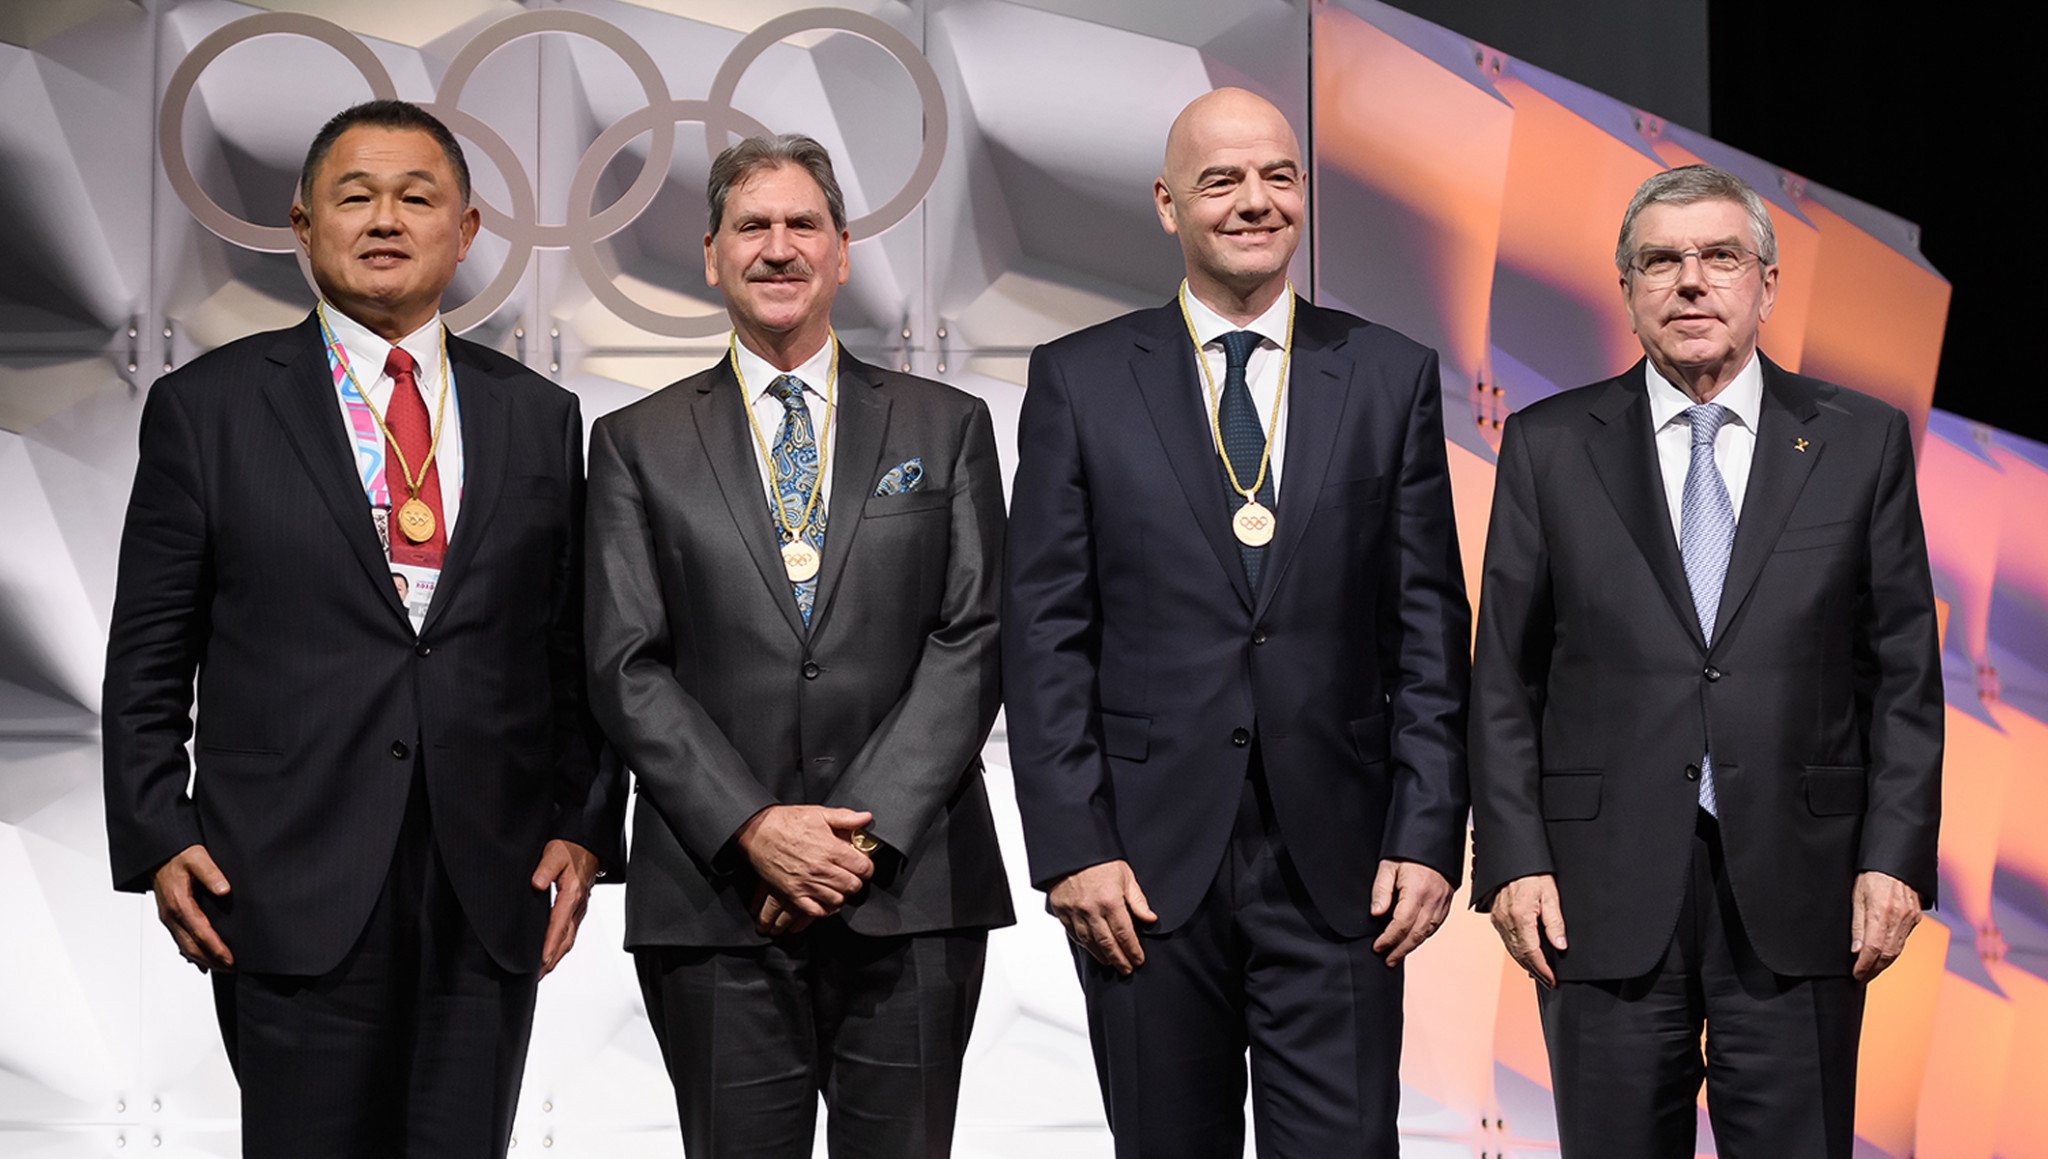 Infantino among new members elected at IOC Session